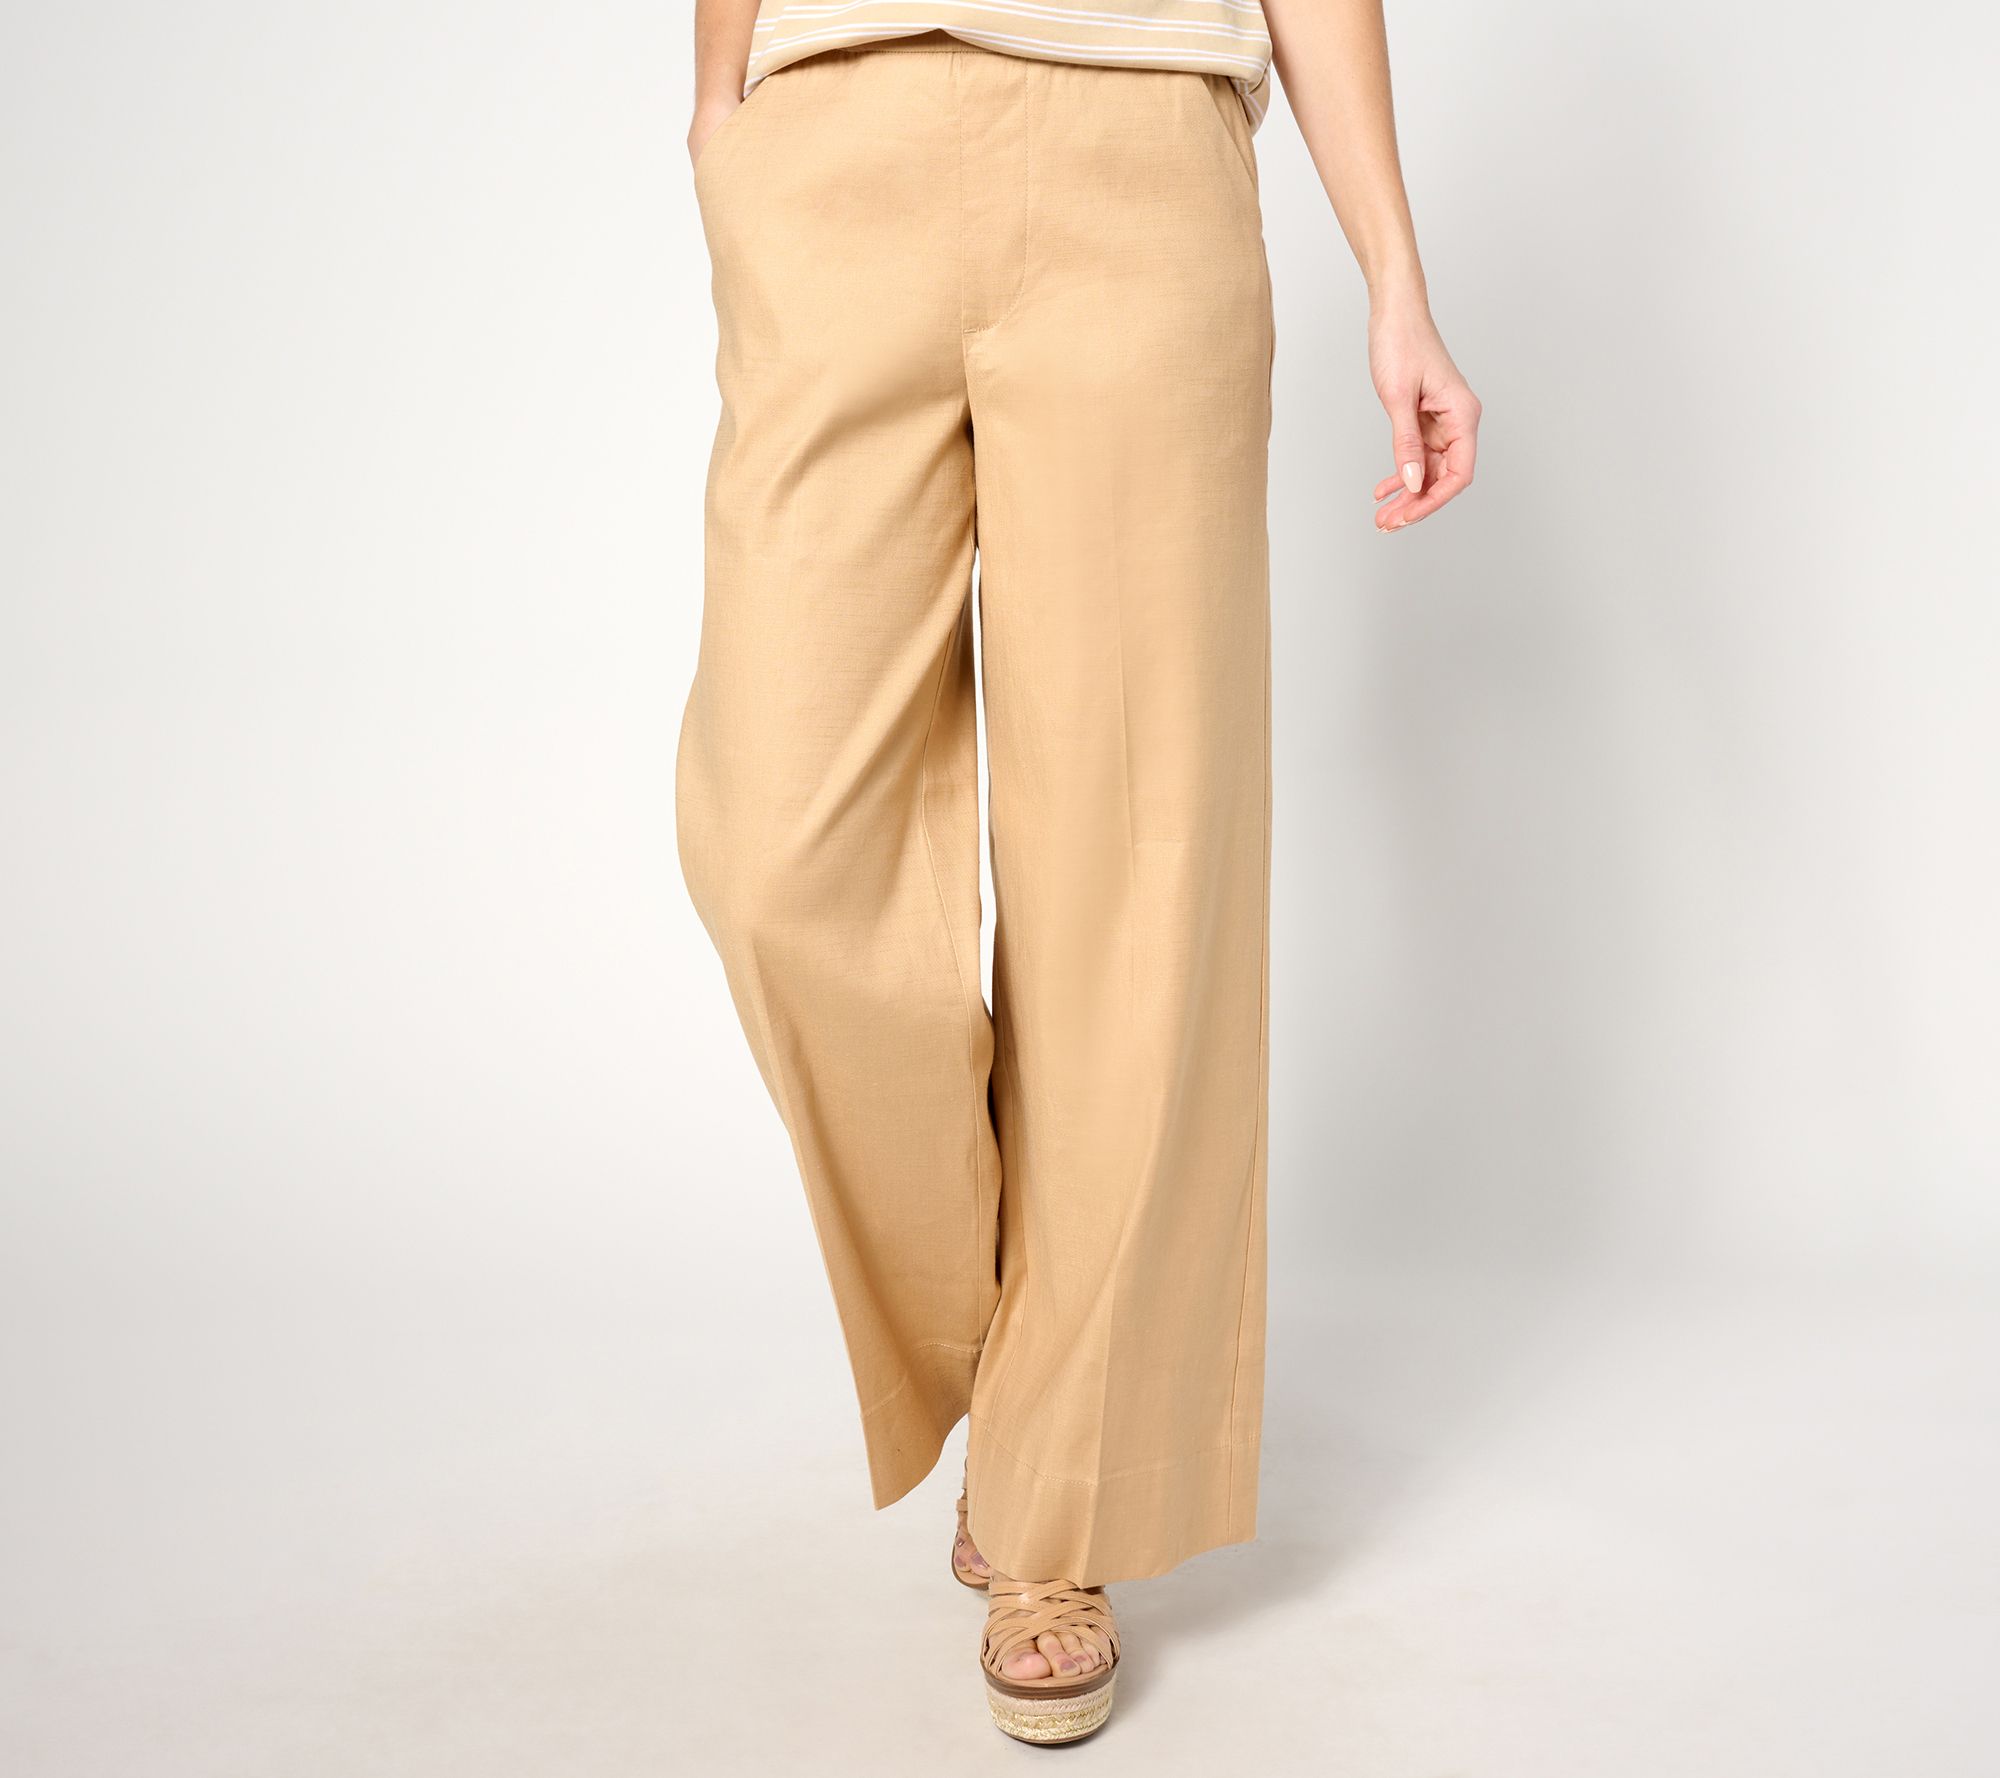 10 Wide Leg Linen Pants You'll Love & Summer Outfit Ideas - Candie Anderson